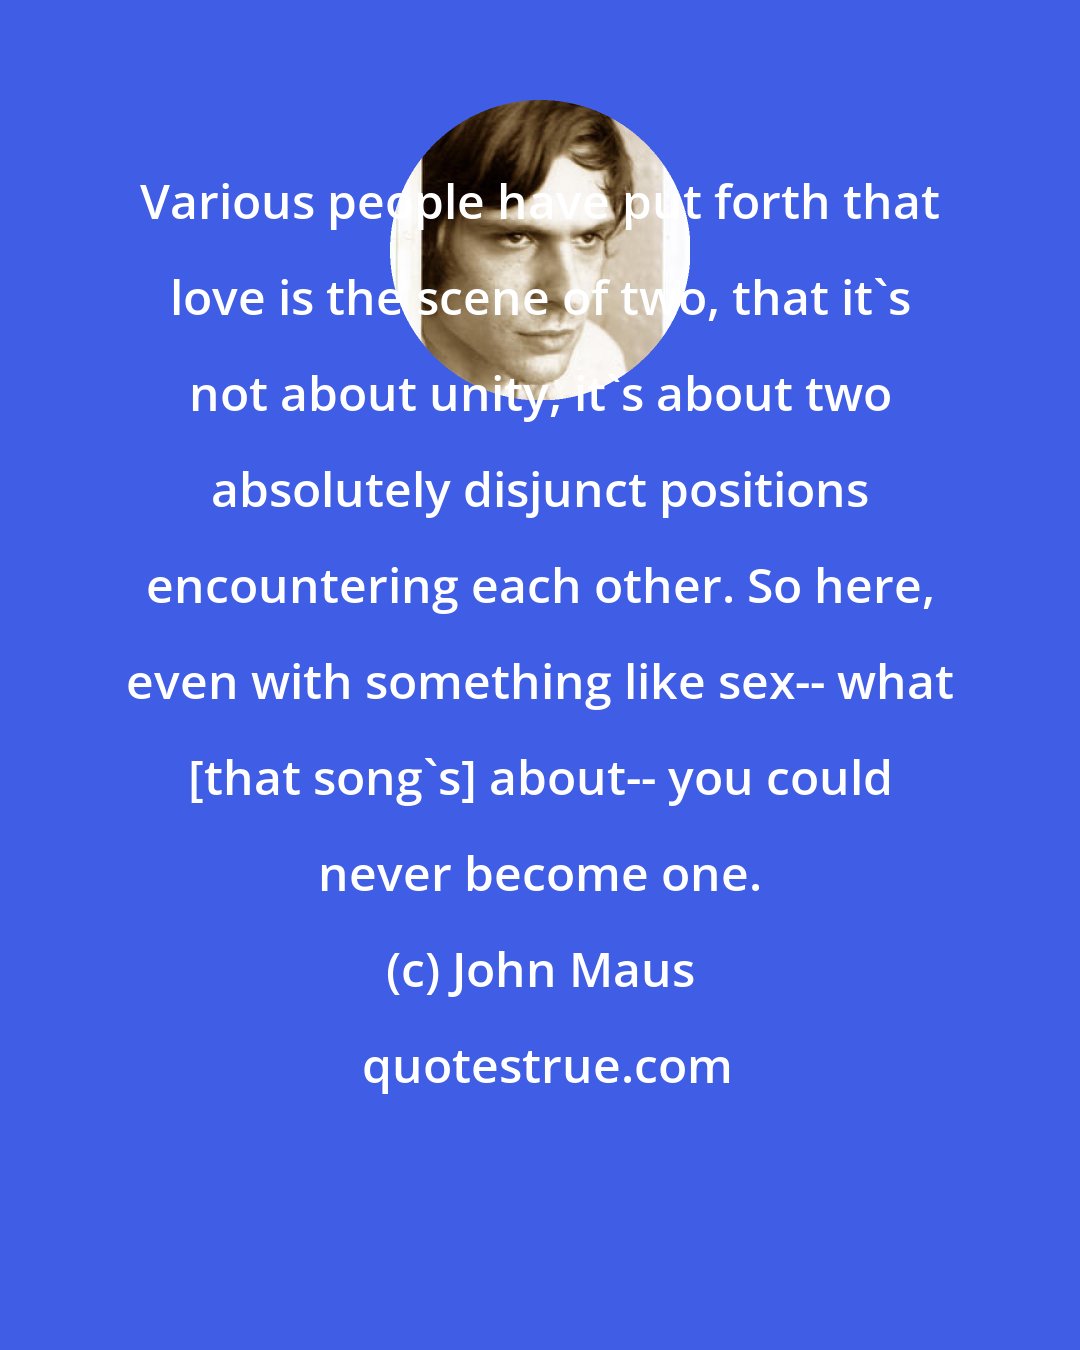 John Maus: Various people have put forth that love is the scene of two, that it's not about unity, it's about two absolutely disjunct positions encountering each other. So here, even with something like sex-- what [that song's] about-- you could never become one.